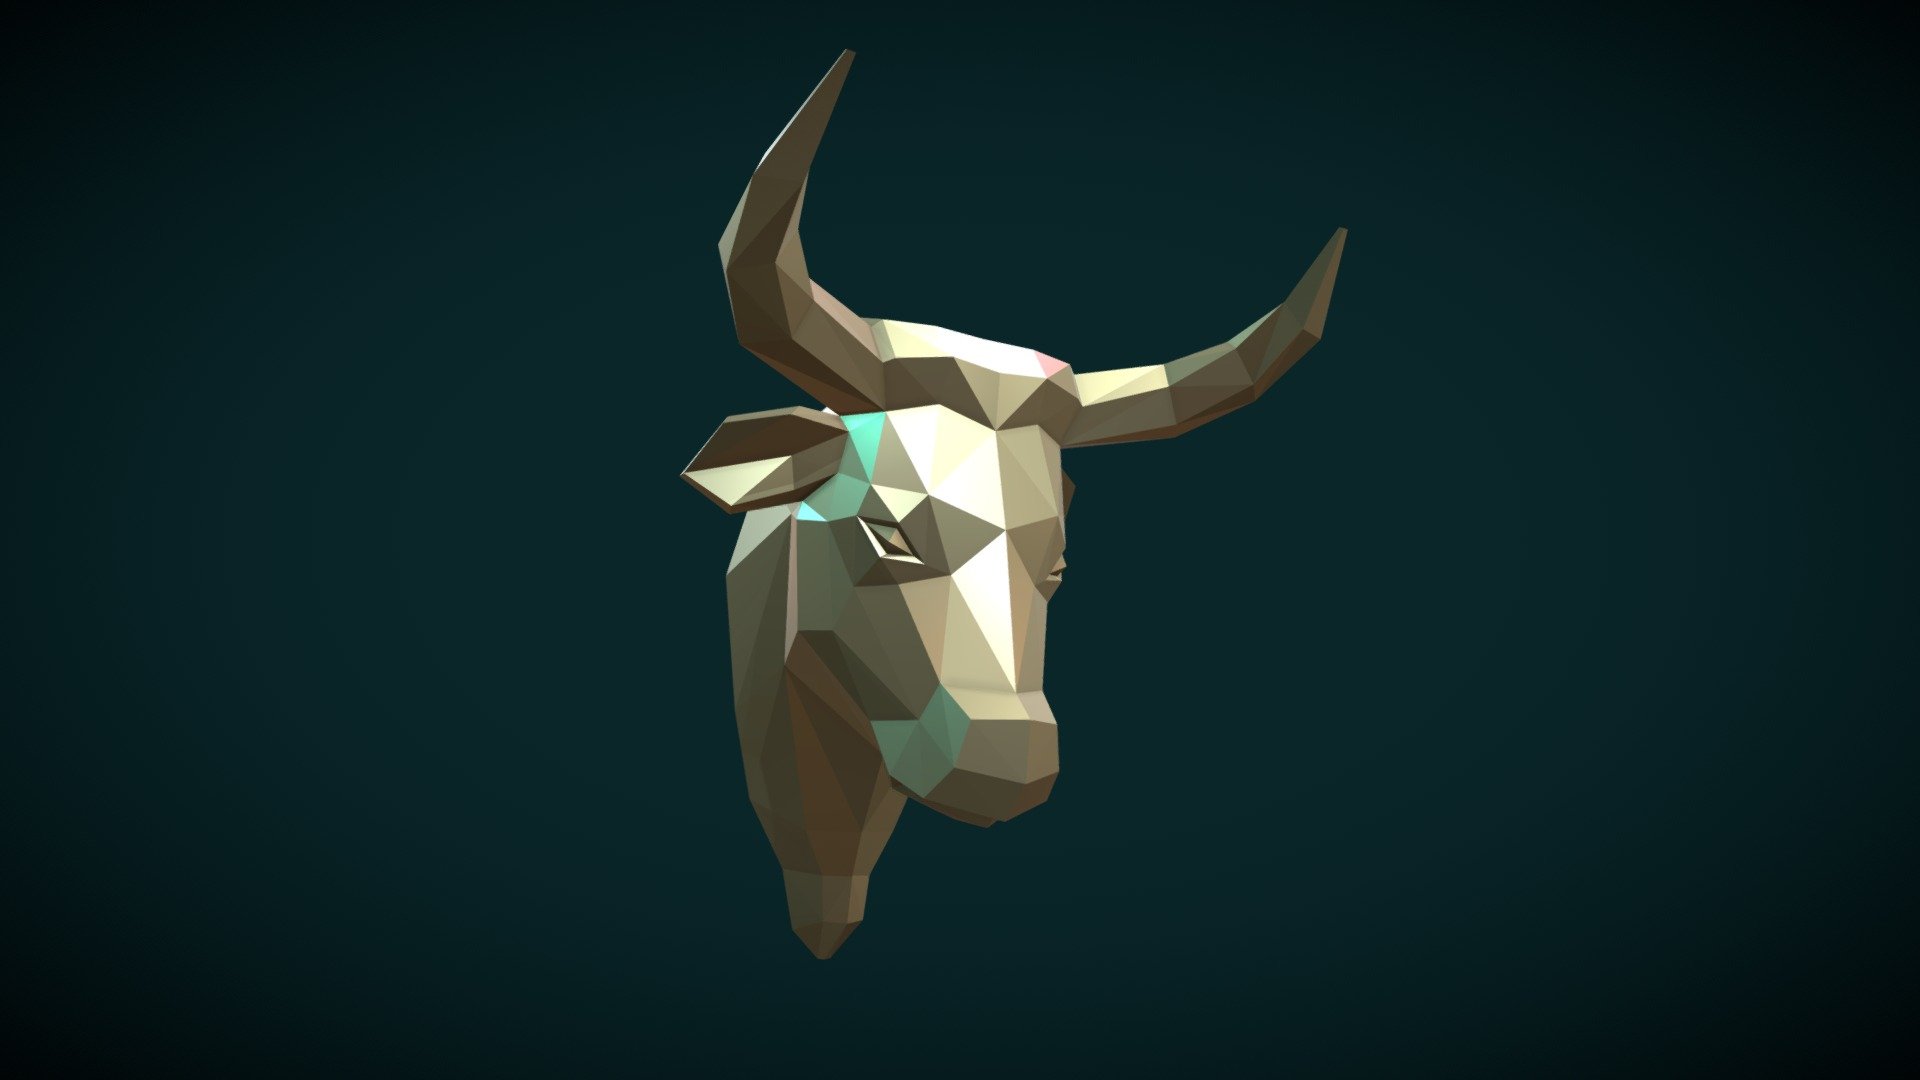 Print ready low poly Bull Head.

Measure units are millimeters, it is about 3 cm in width. (from horn to horn)

Mesh is manifold, no holes, no inverted faces, no bad contiguous edges.

Available formats: .blend, .stl, .obj, .fbx, .dae

Here is three version of the model:

1) LP_Bull_sld. (.stl, .obj, .fbx, .dae) Here is the solid version, the model consists of 428 triangular faces.

2) LP_Bull_6 .(stl, .obj, .fbx, .dae) Here is the a hollow version, the model consists of 19140 triangular faces. Wall thickness is about 0.6 mm.

3) LP_Bull_10 .(stl, .obj, .fbx, .dae) Here is another hollow version, the model consists of 16664 triangular faces. Wall thickness is about 10 mm 3d model